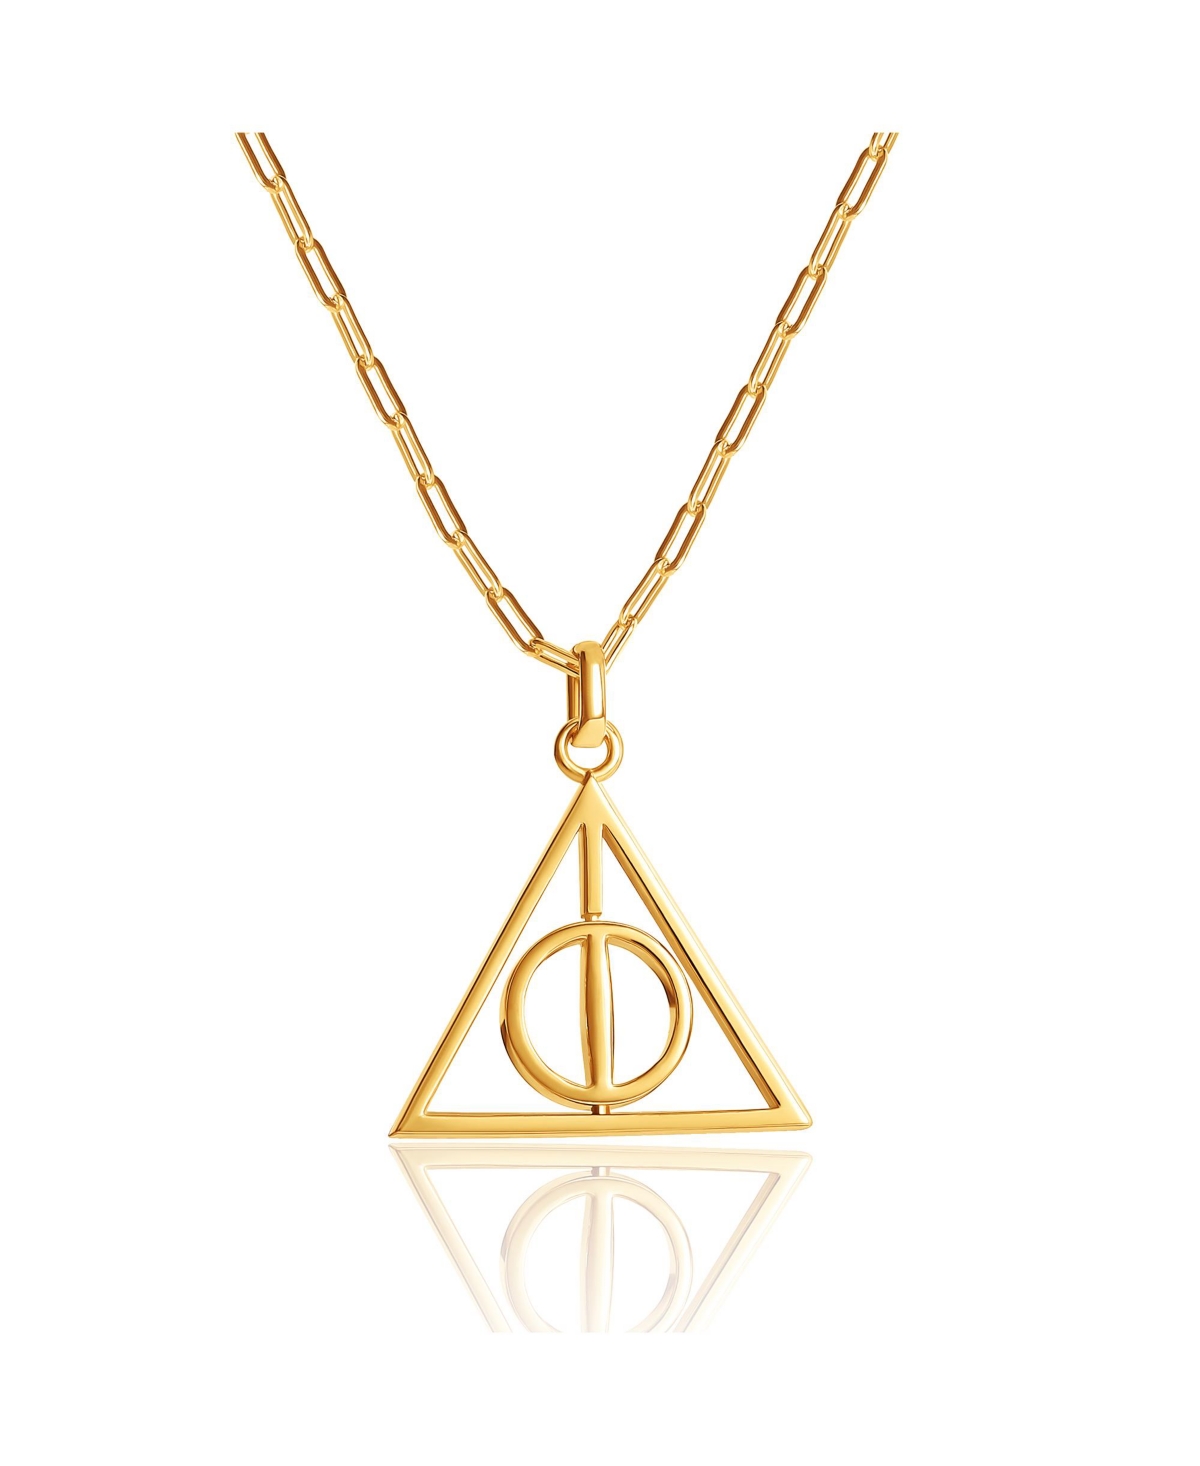 Womens Deathly Hallows 18KT Gold Plated Paperclip Chain Necklace with Spinning Deathly Hallows Pendant, 18" - Gold tone